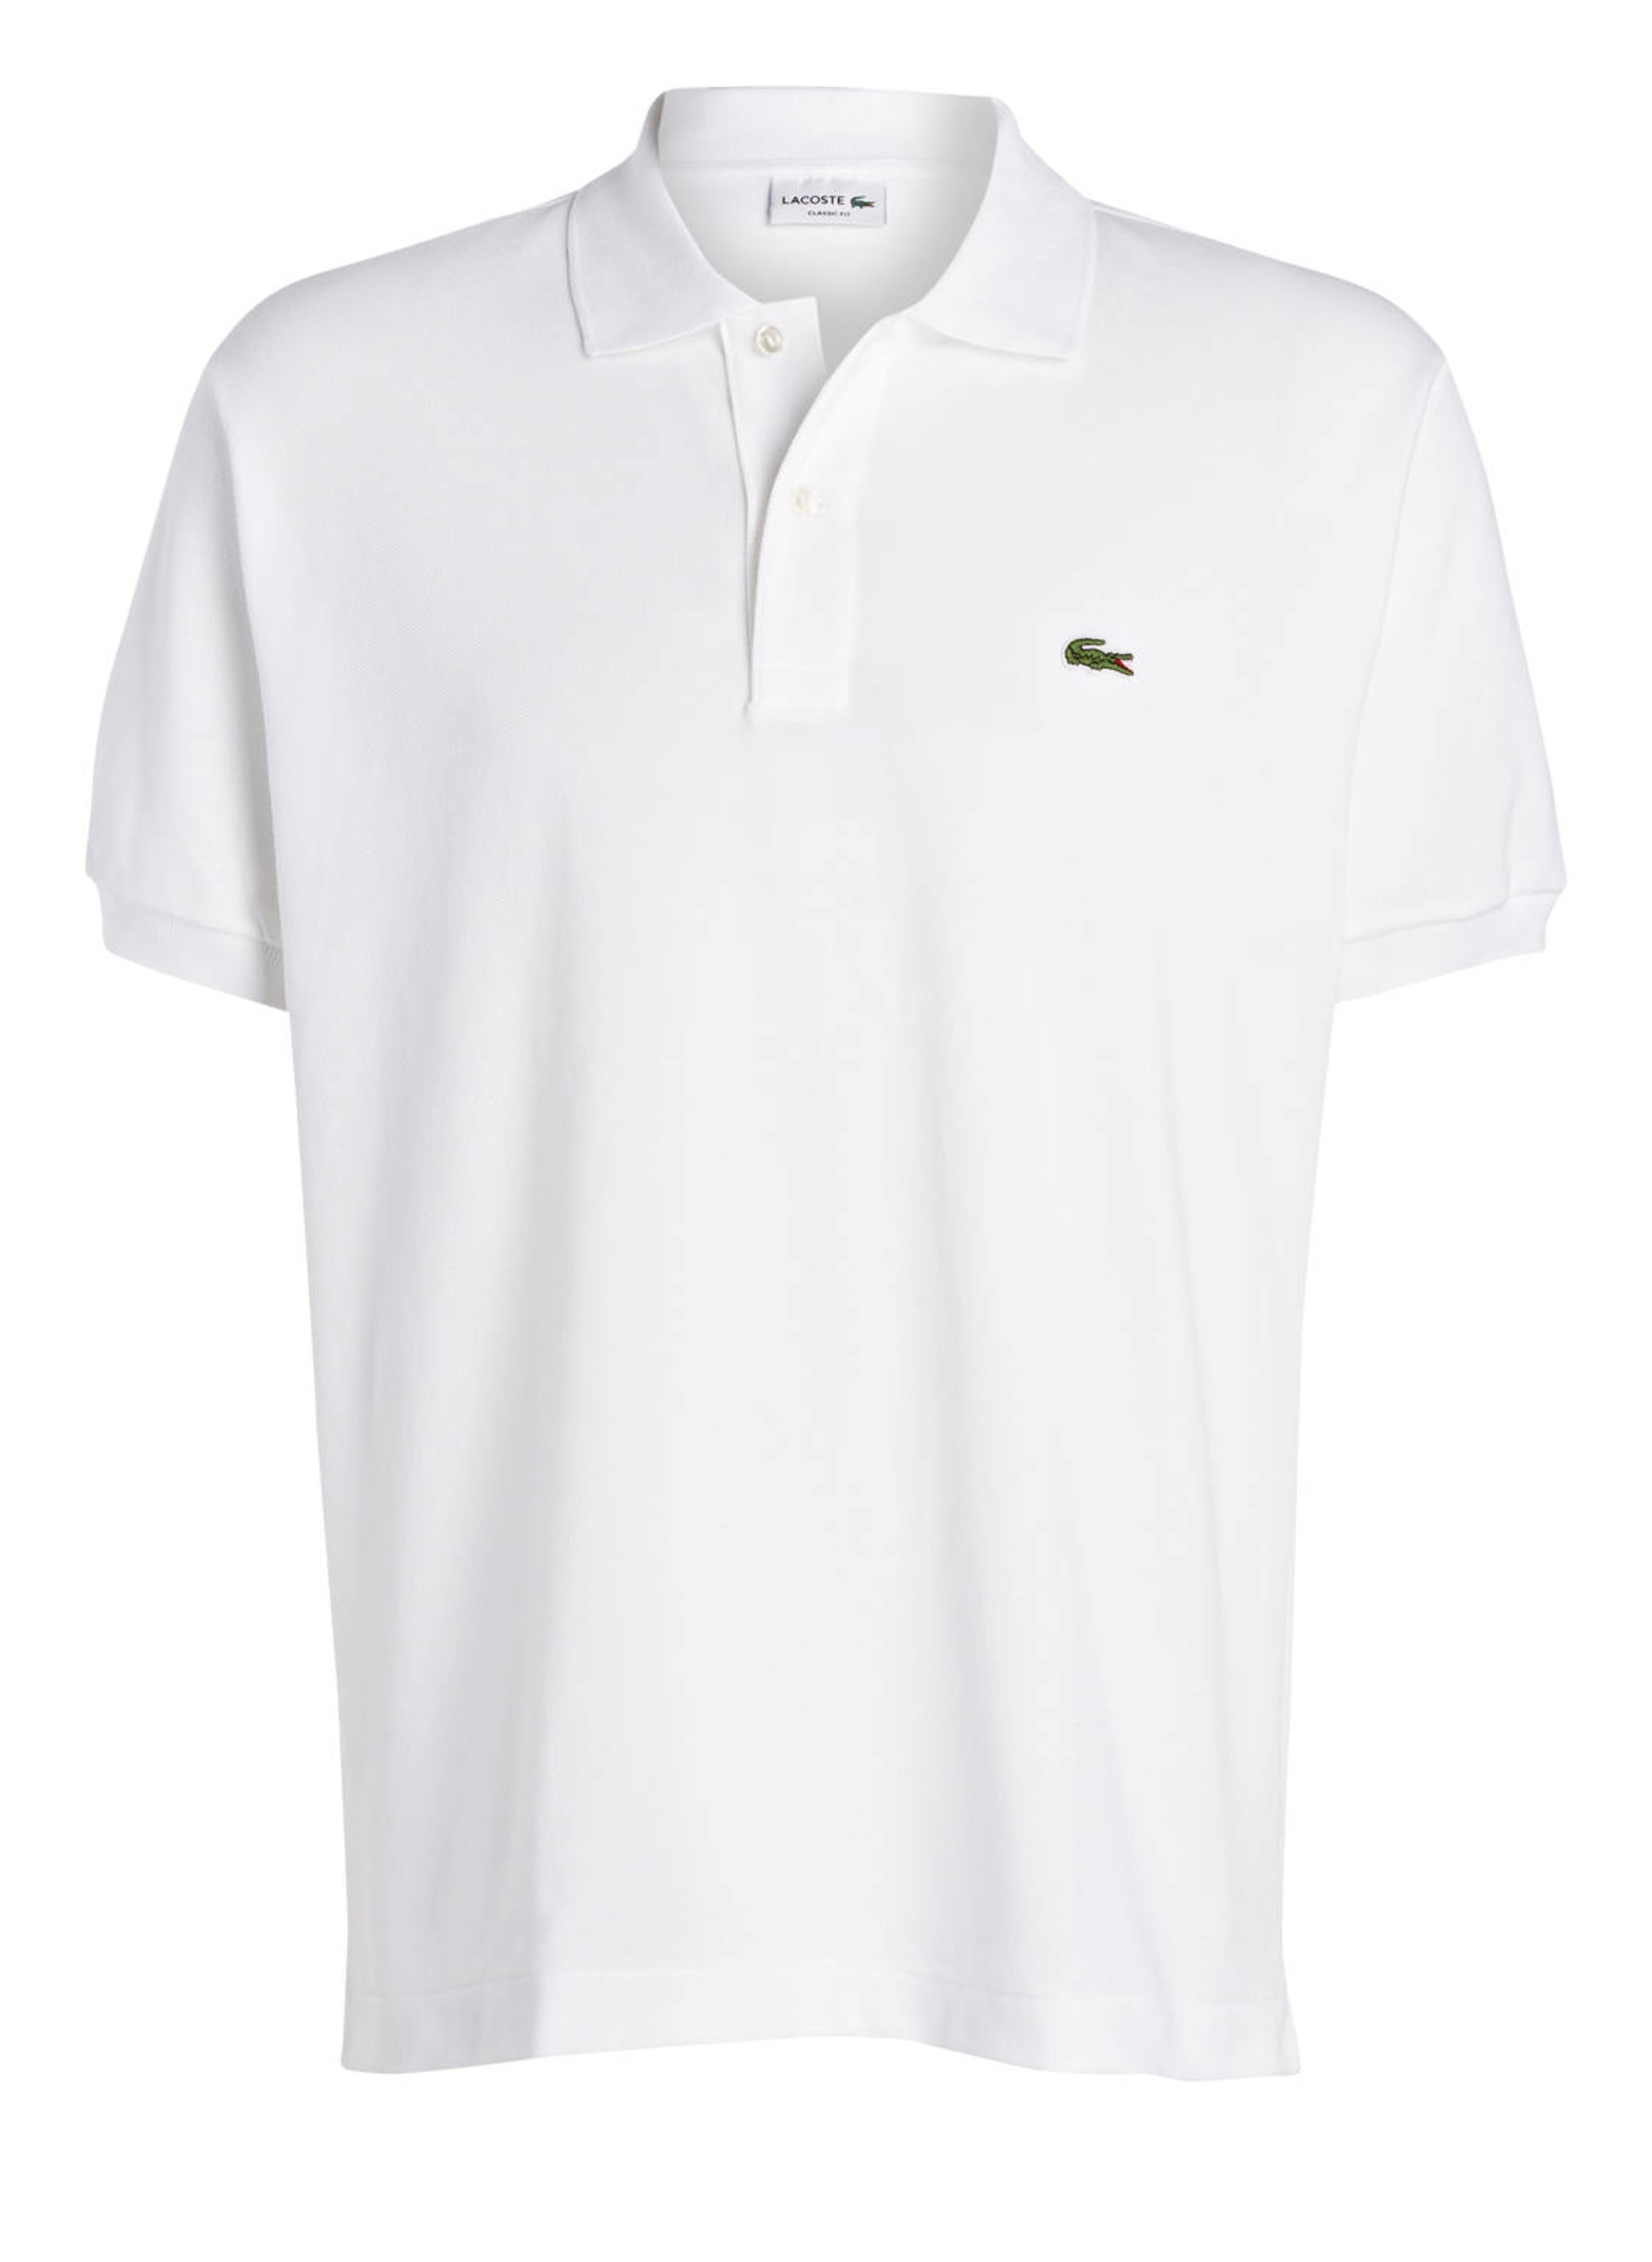 LACOSTE Piqué-Poloshirt Classic Fit in weiss | T-Shirts